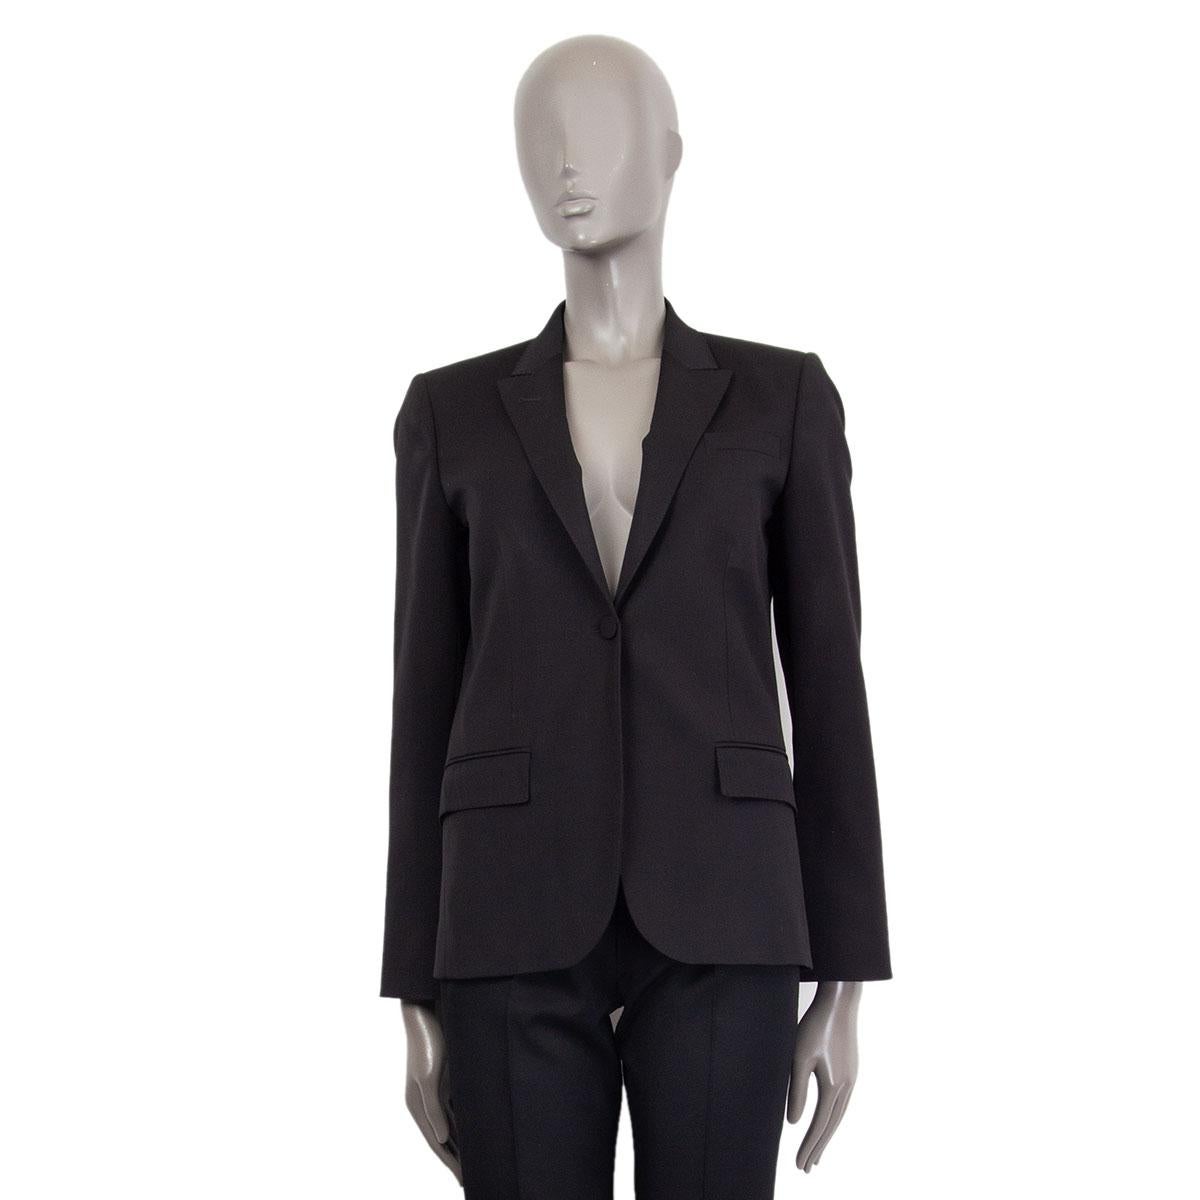 Gucci classic one-button blazer in black cool wool blend (missing tag) and lined in black silk with 4 buttons on the cuff. Has been worn and is in excellent condition. 

Tag Size 42
Size M
Shoulder Width 40cm (15.6in)
Bust 92cm (35.9in)
Waist 44cm